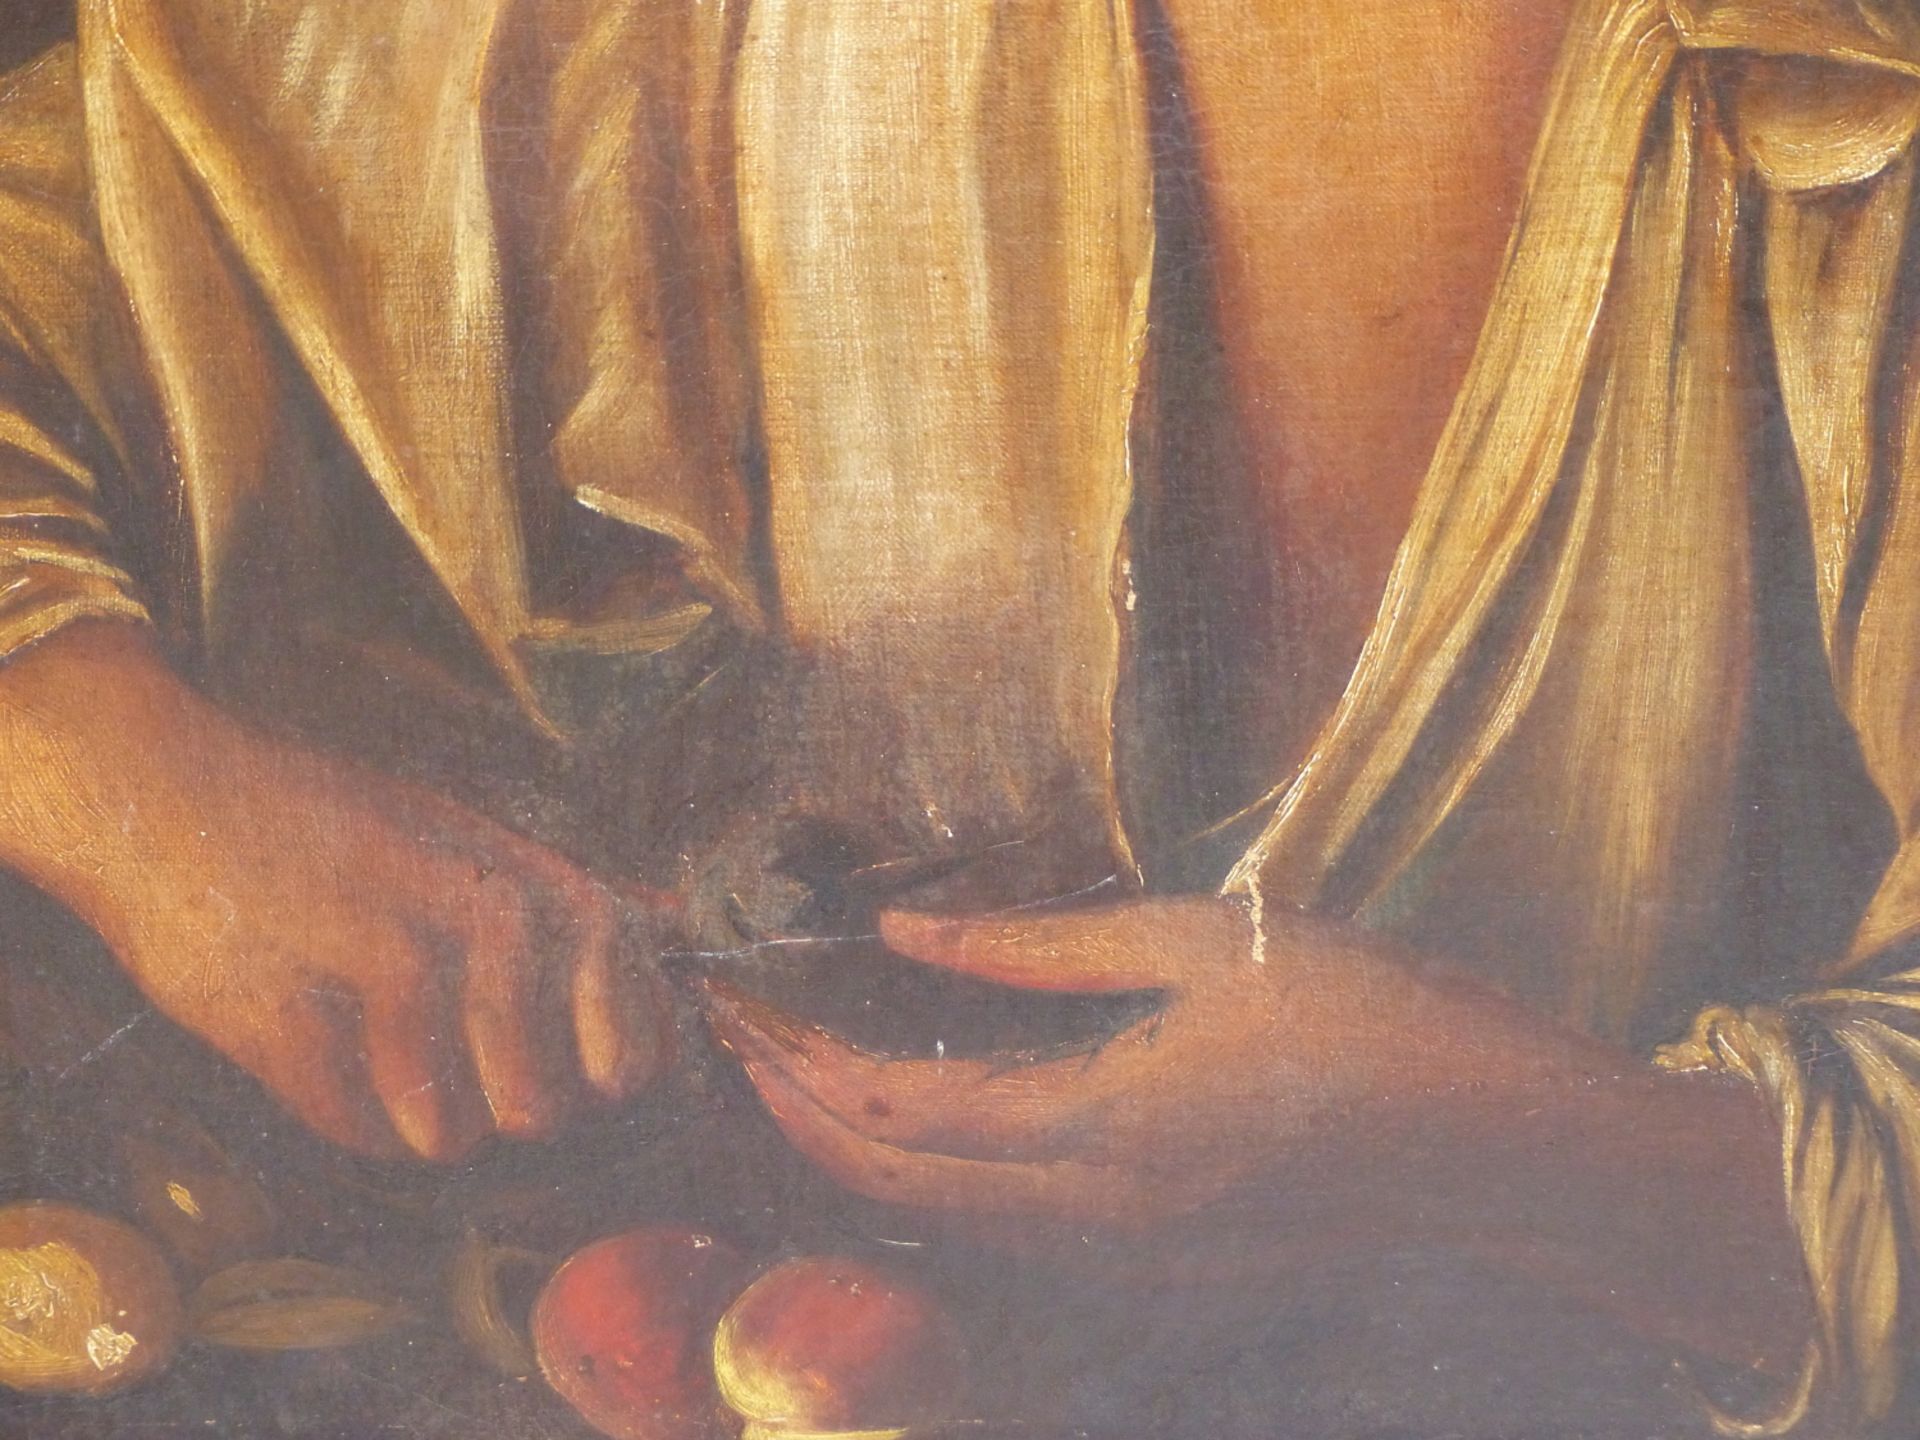 AFTER THE OLD MASTERS. (EARLY 19TH CENTURY) A YOUNG MAN PEELING APPLES. OIL ON CANVAS 50 X 60 cm. - Image 3 of 6